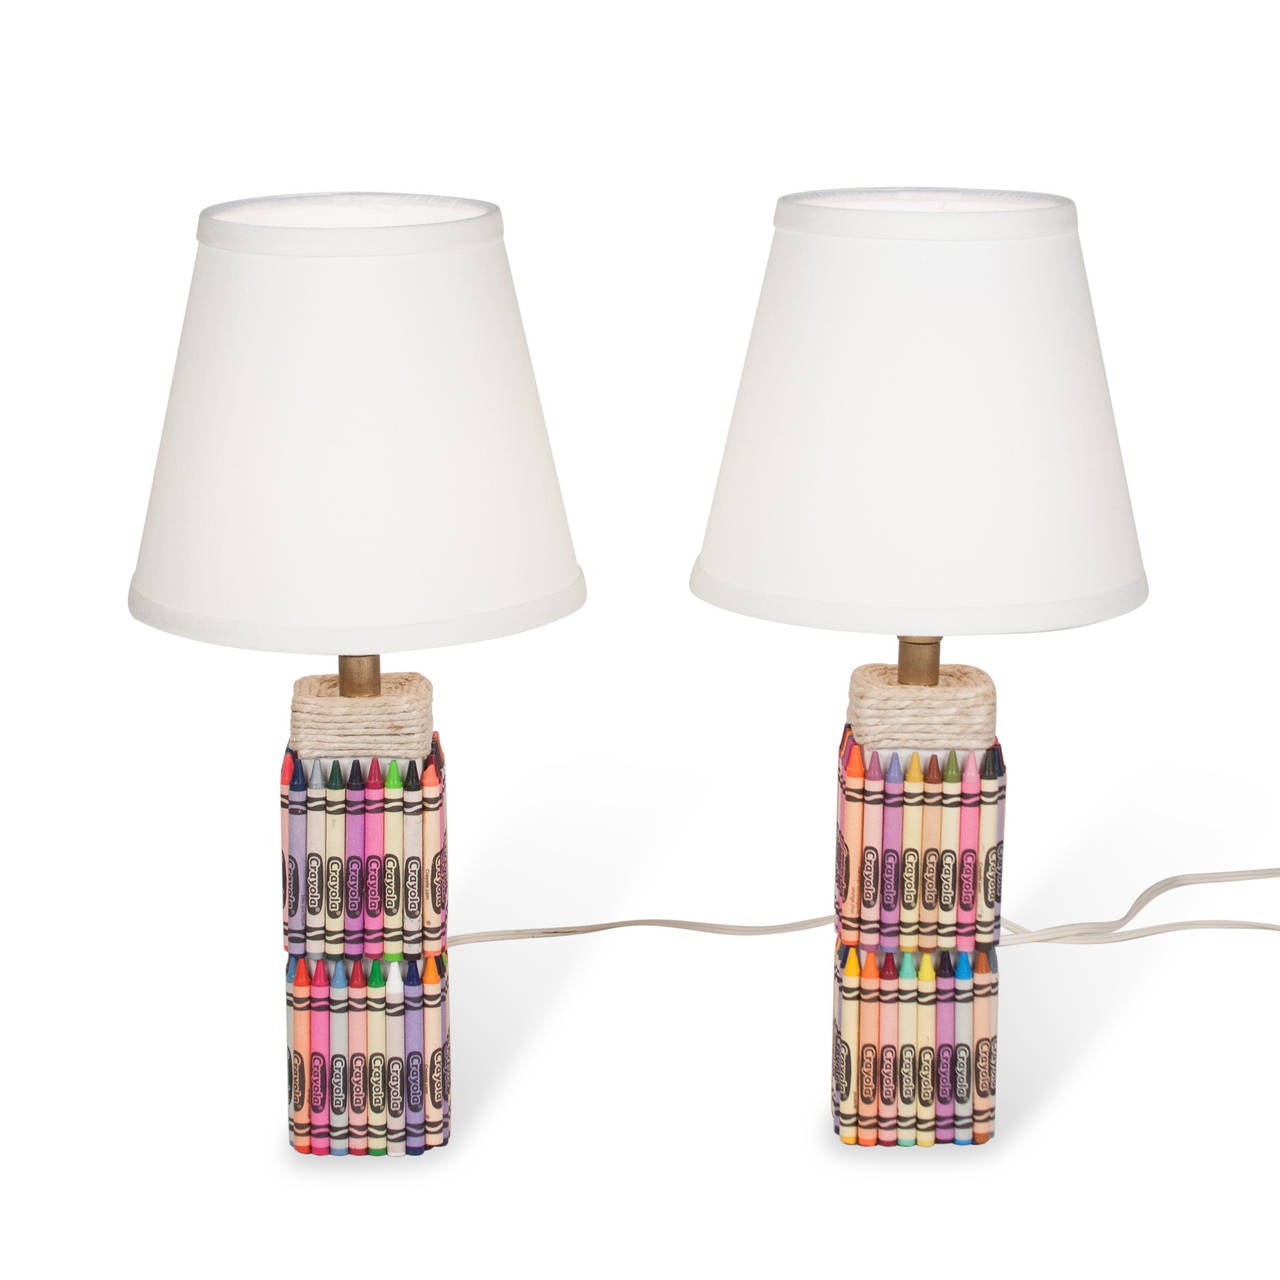 Pair of crayon table lamps, square ceramic form with Crayola brand crayons of assorted colors applied to surface, with wrapped rope at top of base, in custom linen shade. American 2000s. Overall height 16 1/2 in, base is 3 in square. Shade measures